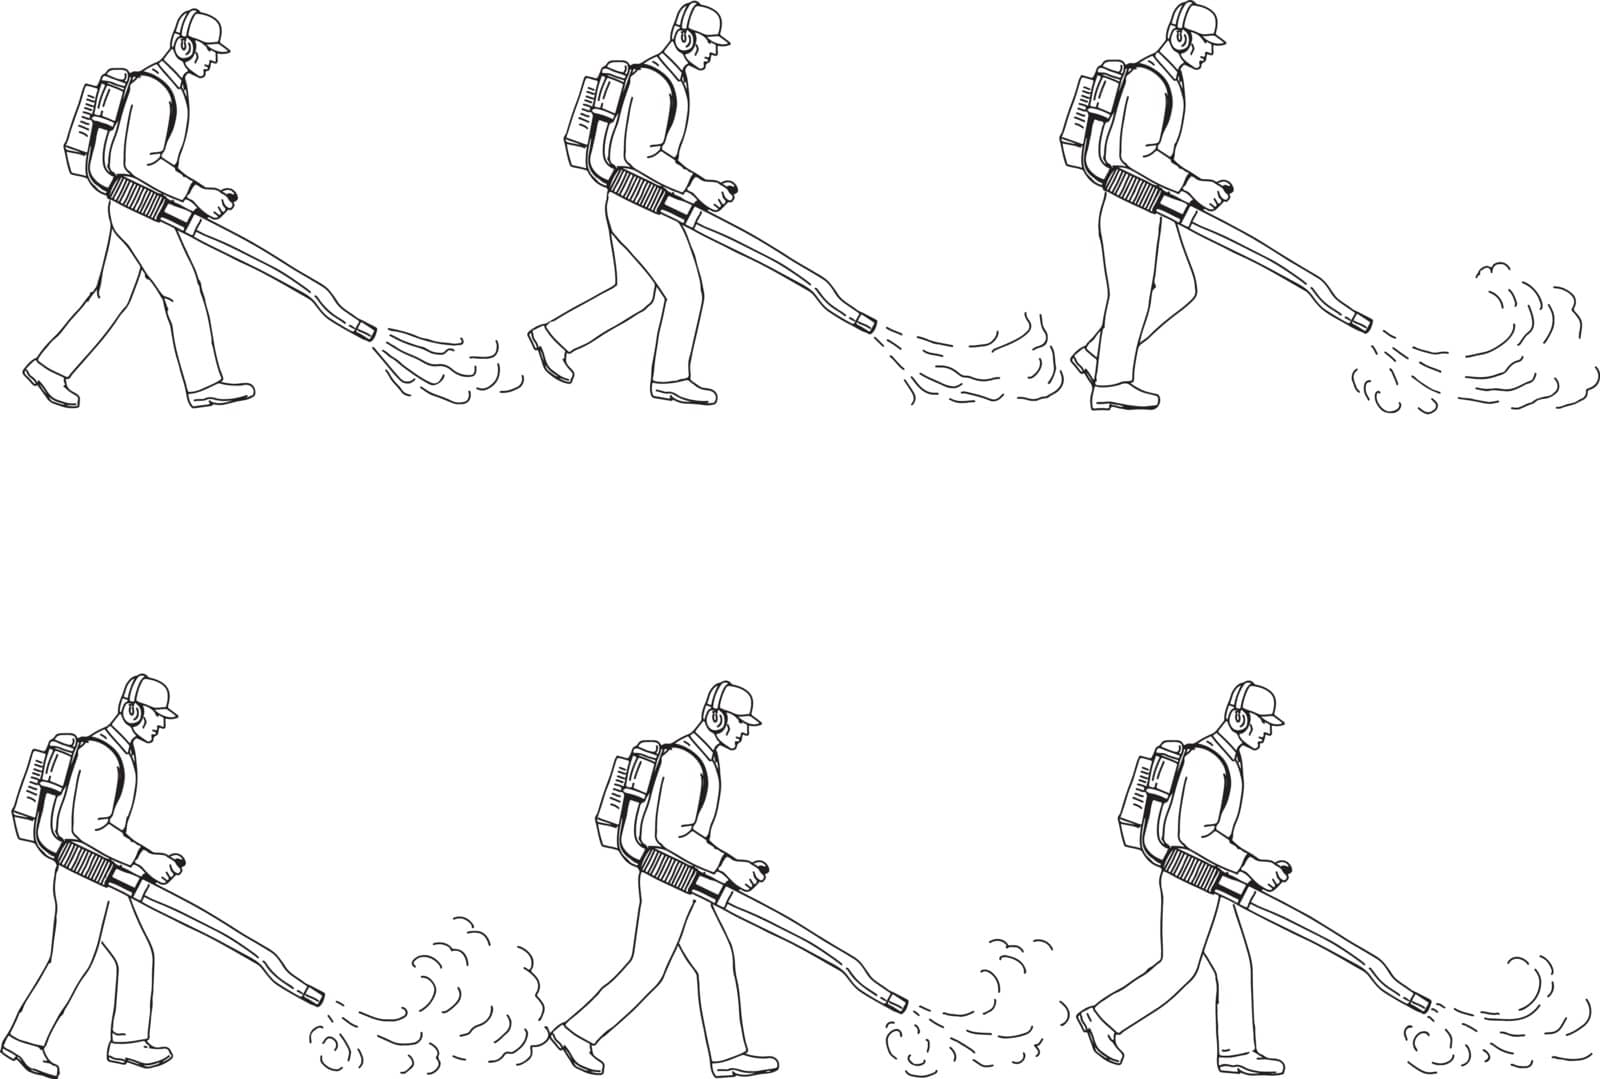 Gardener With Leaf Blower Walk Sequence Drawing by patrimonio